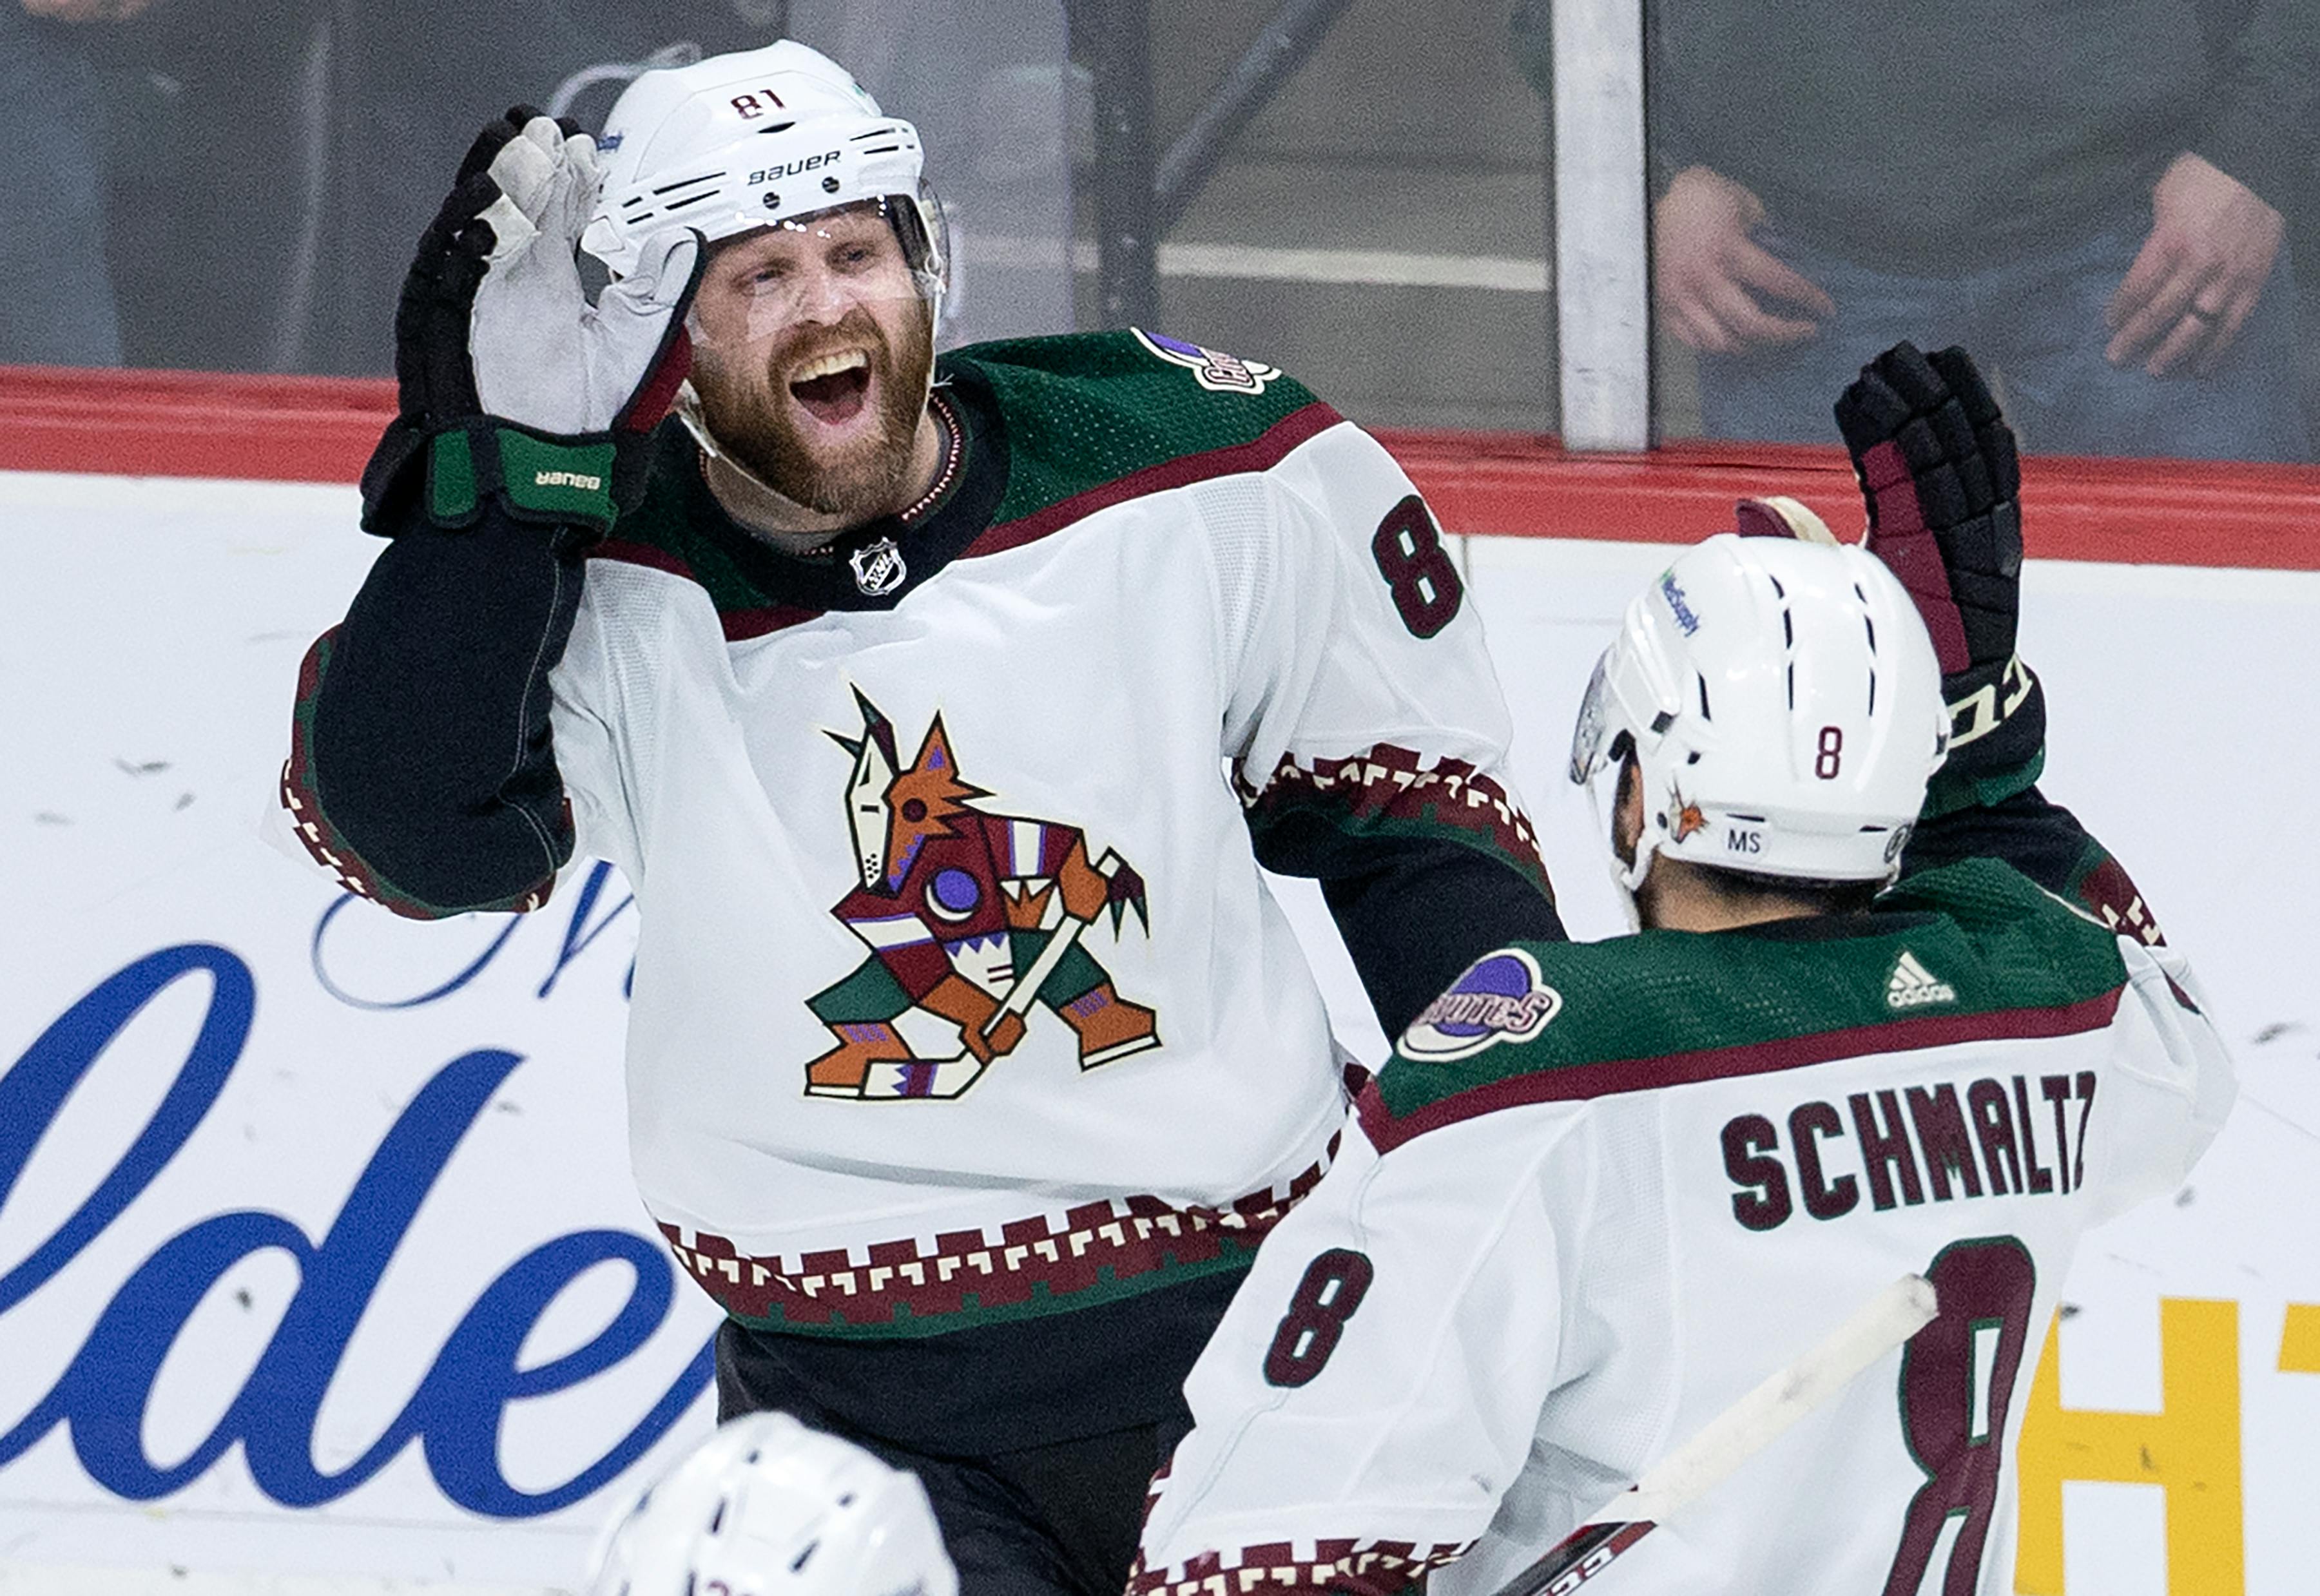 Wild's long points streaks come to an end with loss to lowly 